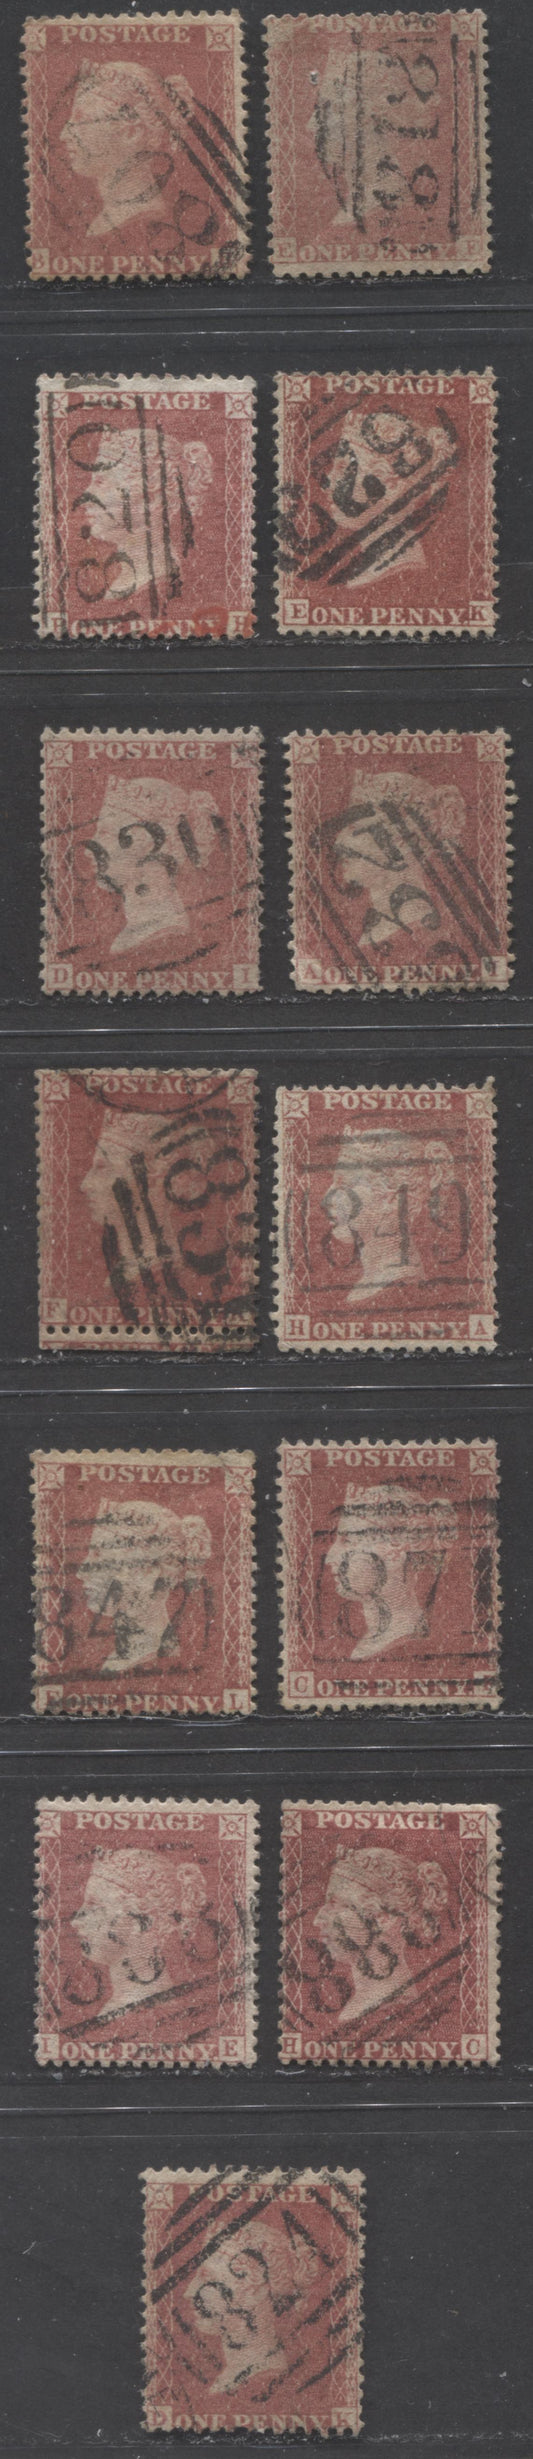 Lot  472 Great Britain - Barred Numeral Cancels For England & Wales: 800-899 SC#20 1d Rose Red & Deep Rose Red 1857-1863 1d Red Stars, Large Crown, White Paper, Perf. 14 Issue, #807/#888, 13 Good, VG and Fine Used Singles, Estimated Value $170